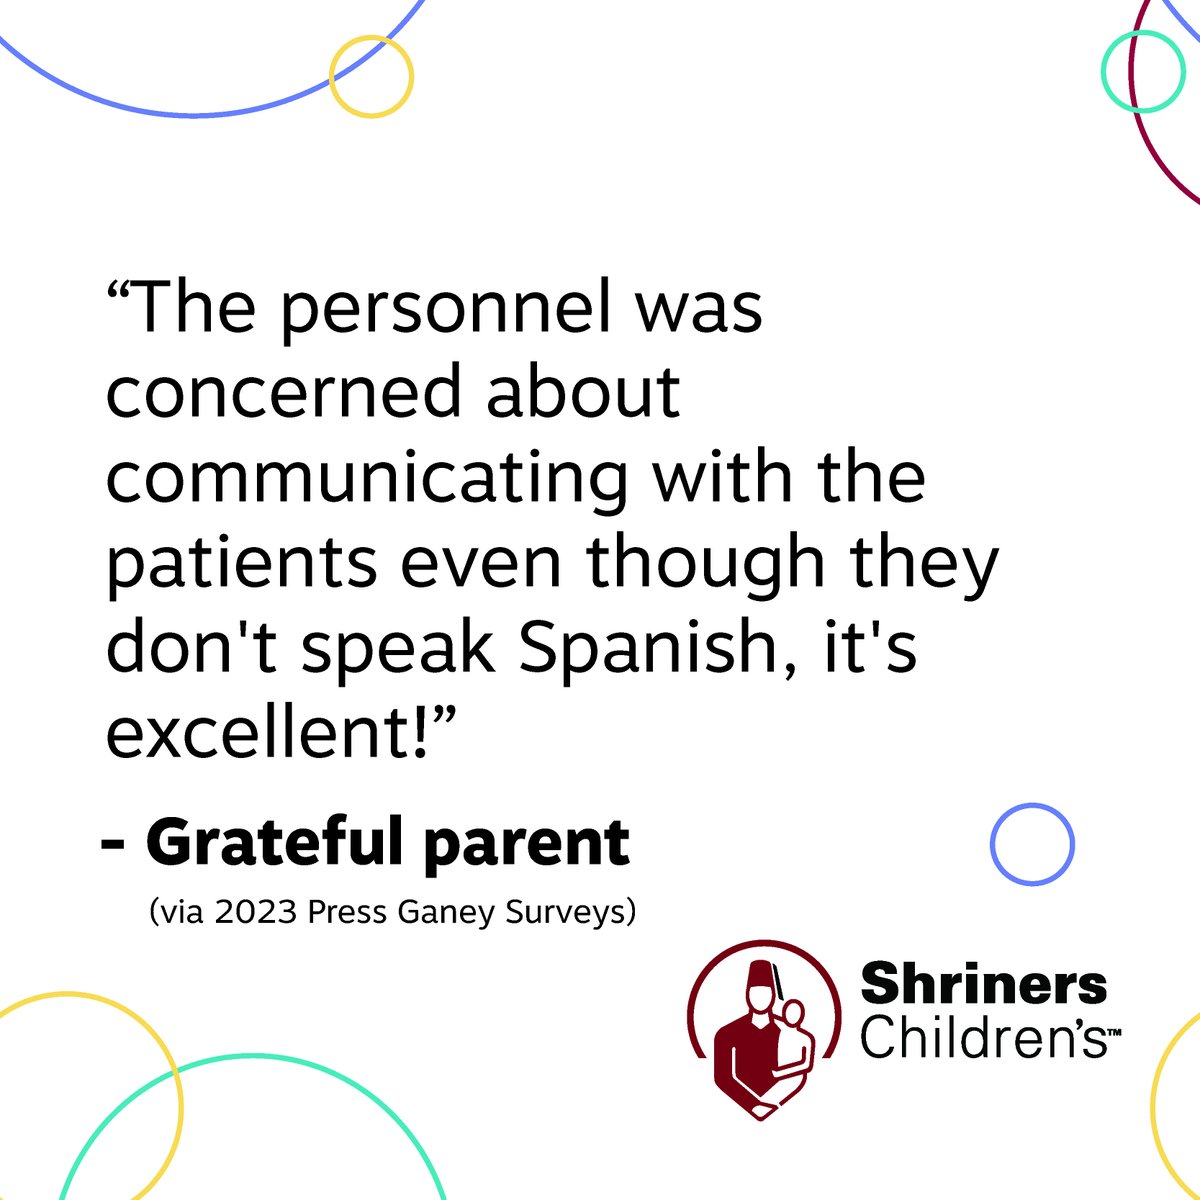 What our grateful parents have to say when surveyed...
#FeelGoodFriday #ShrinersChildrens #PediatricOrthopedics #PressGaneyComments